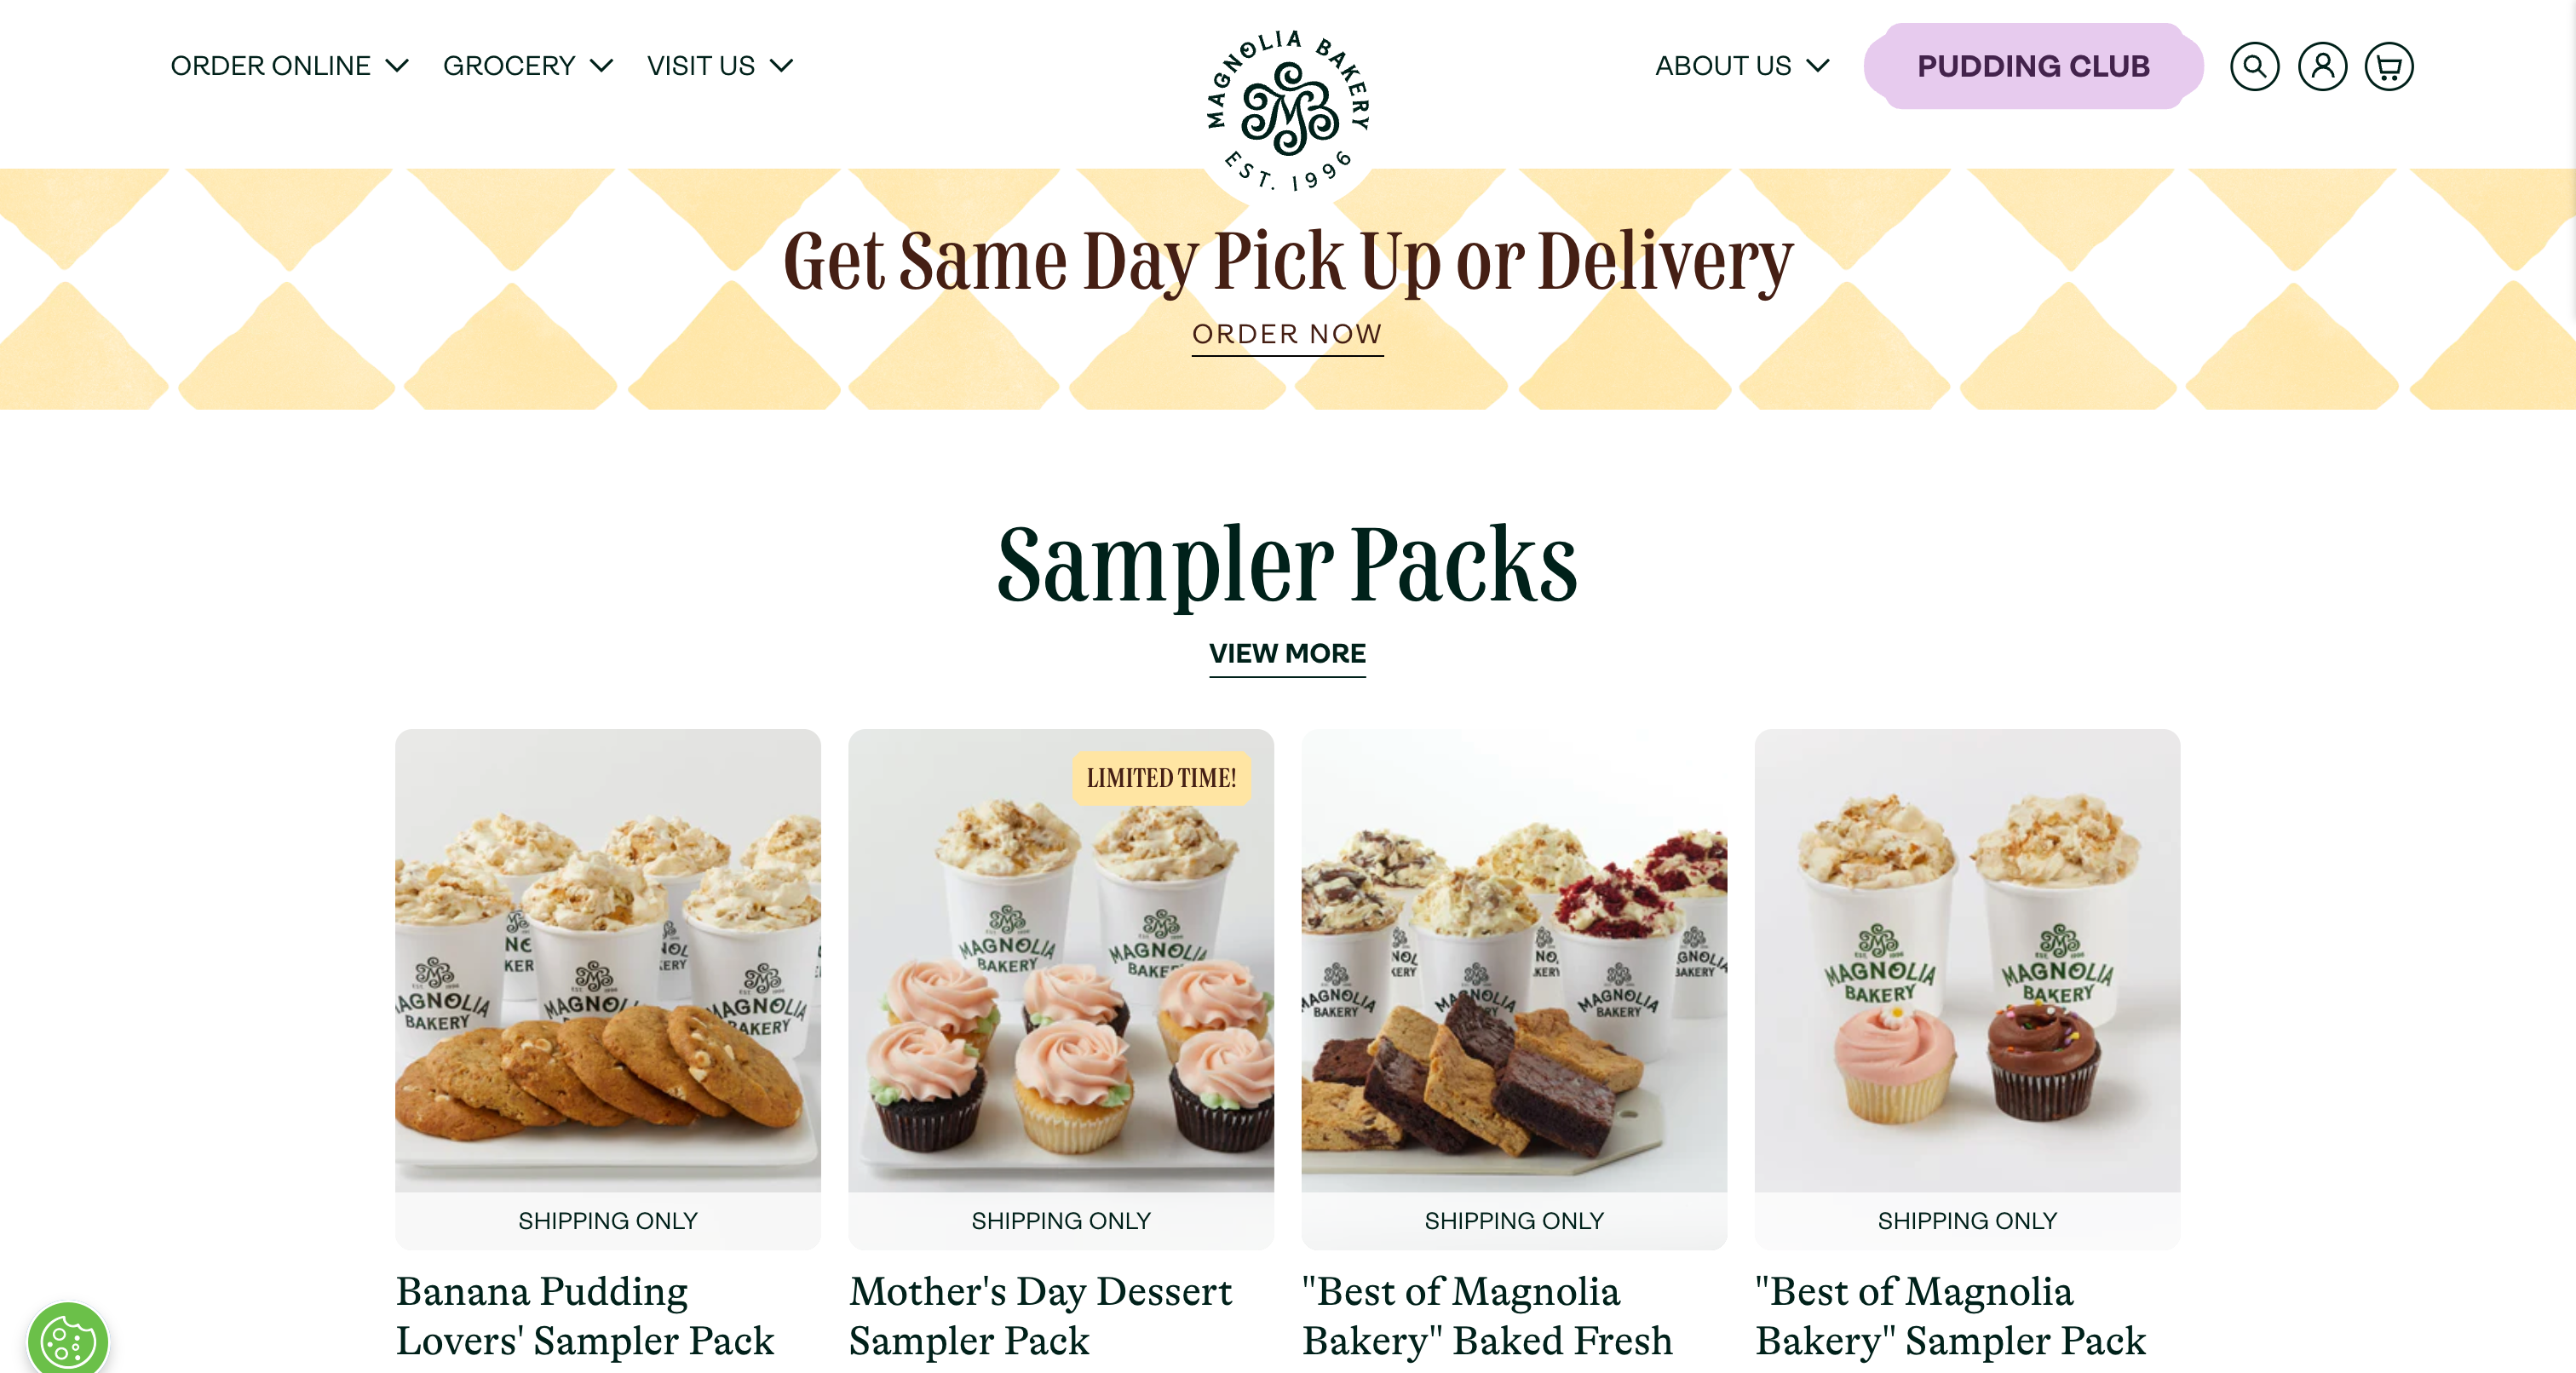 Magnolia bakery product listings showing cookies and cakes for home delivery.